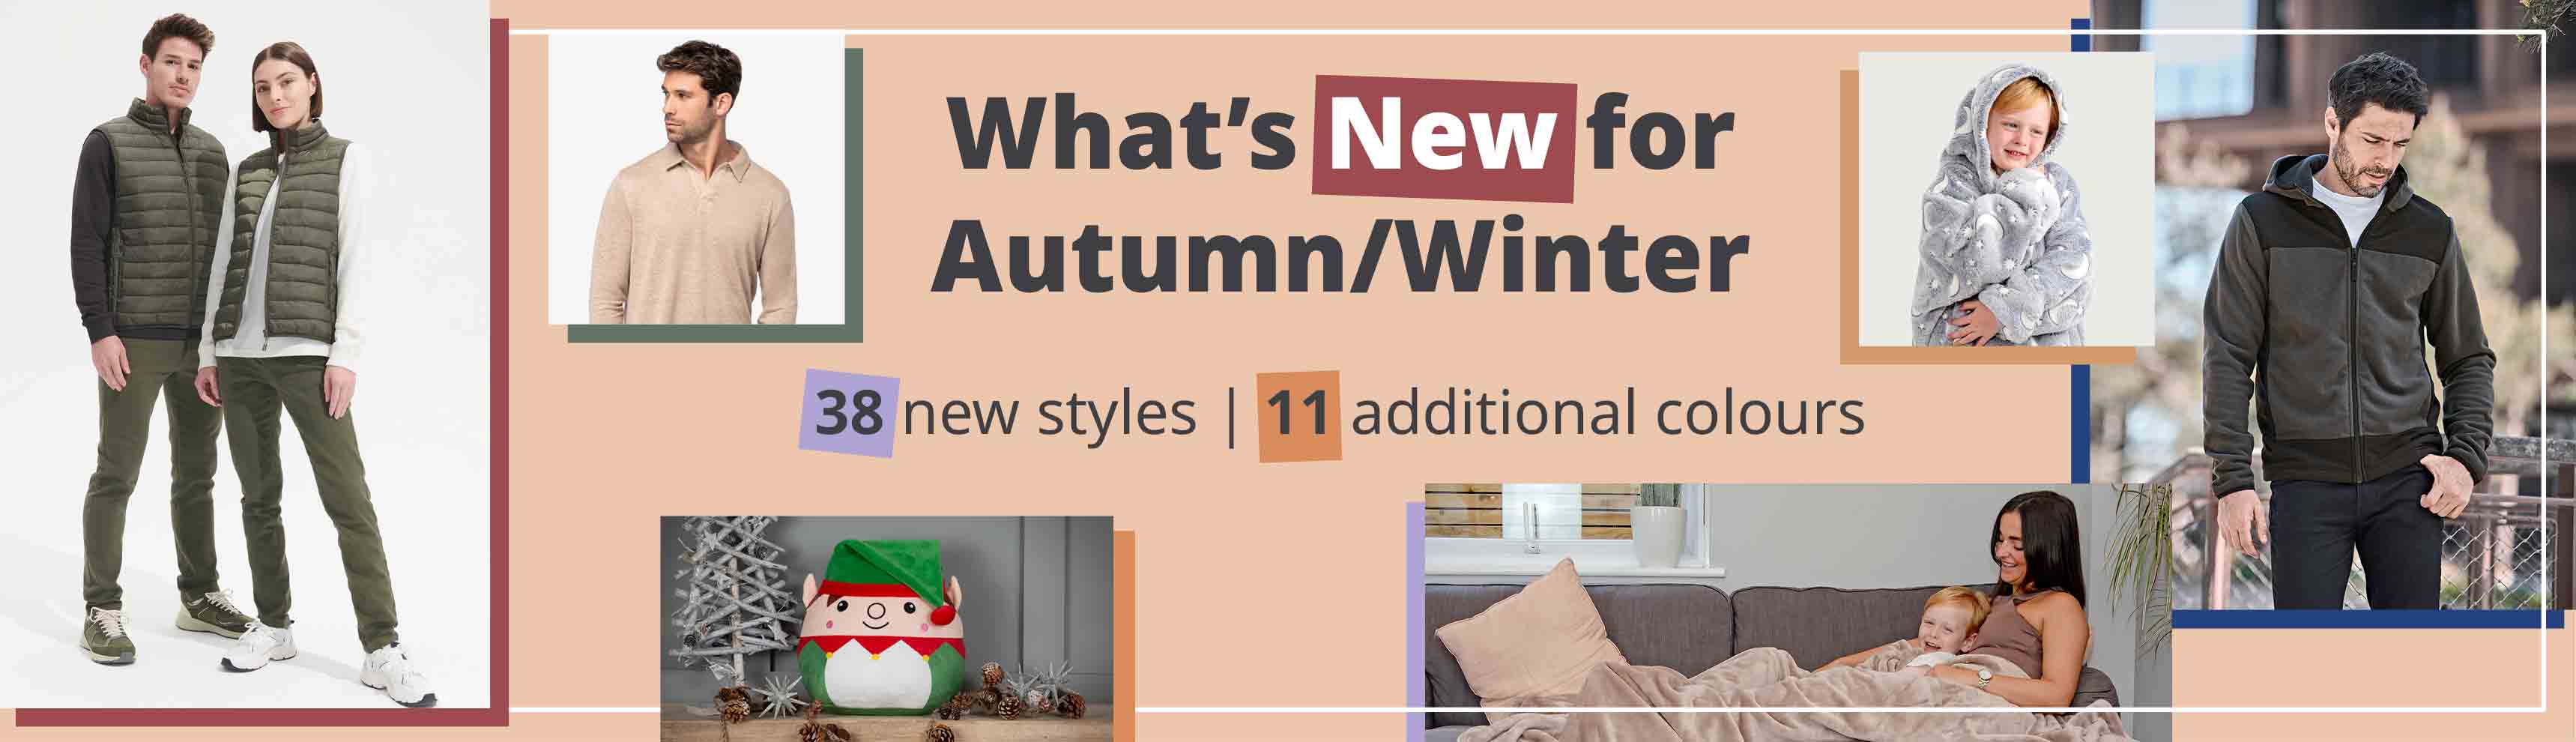 NEW styles for Autumn/Winter!